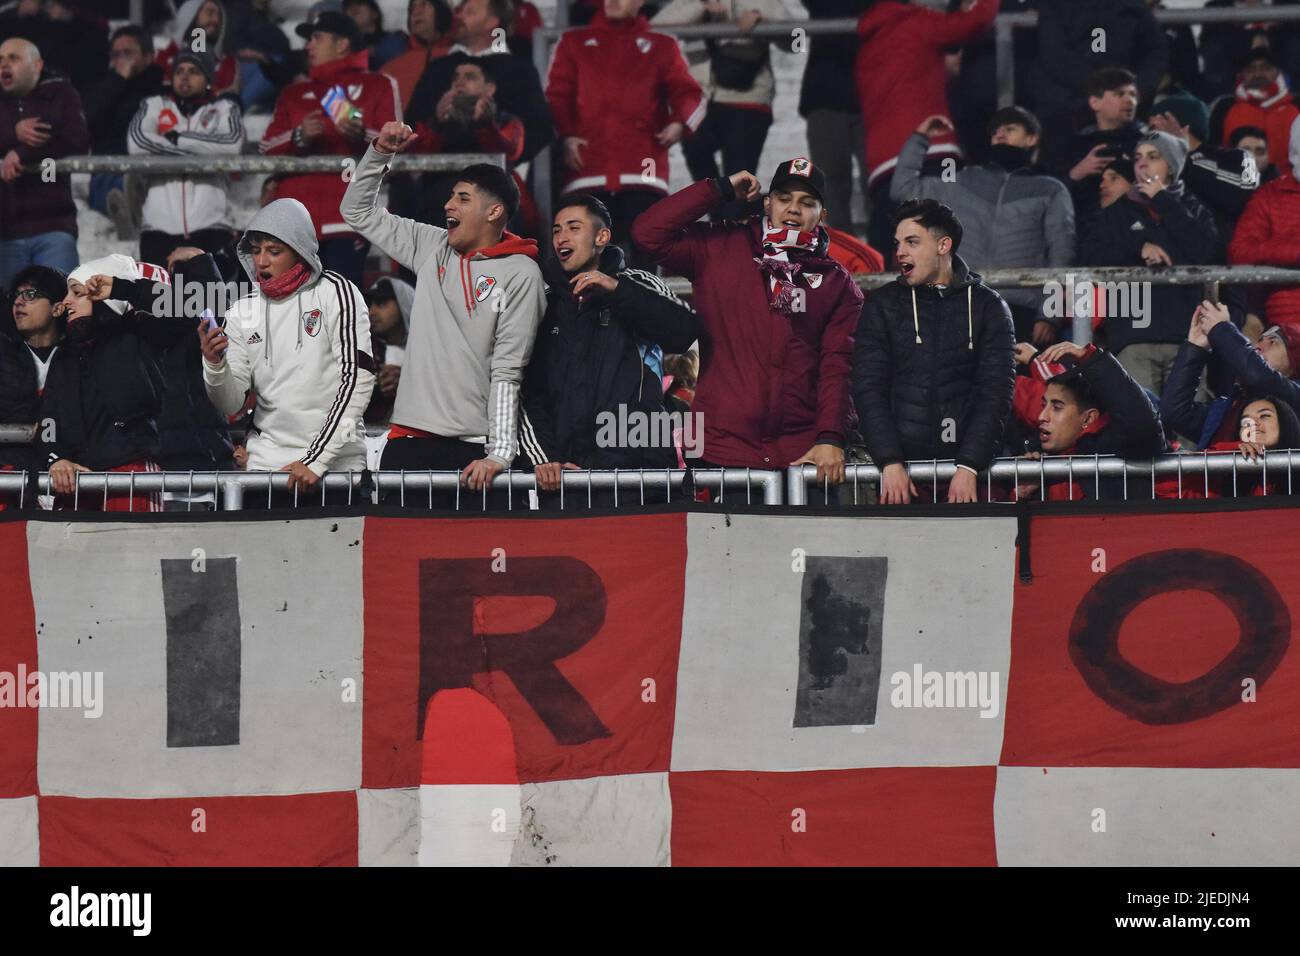 Buenos Aires, Argentina - June 27. Fans of River Plate during a Liga de Fútbol Profesional match between River and Lanús at Estadio Monumental. Stock Photo